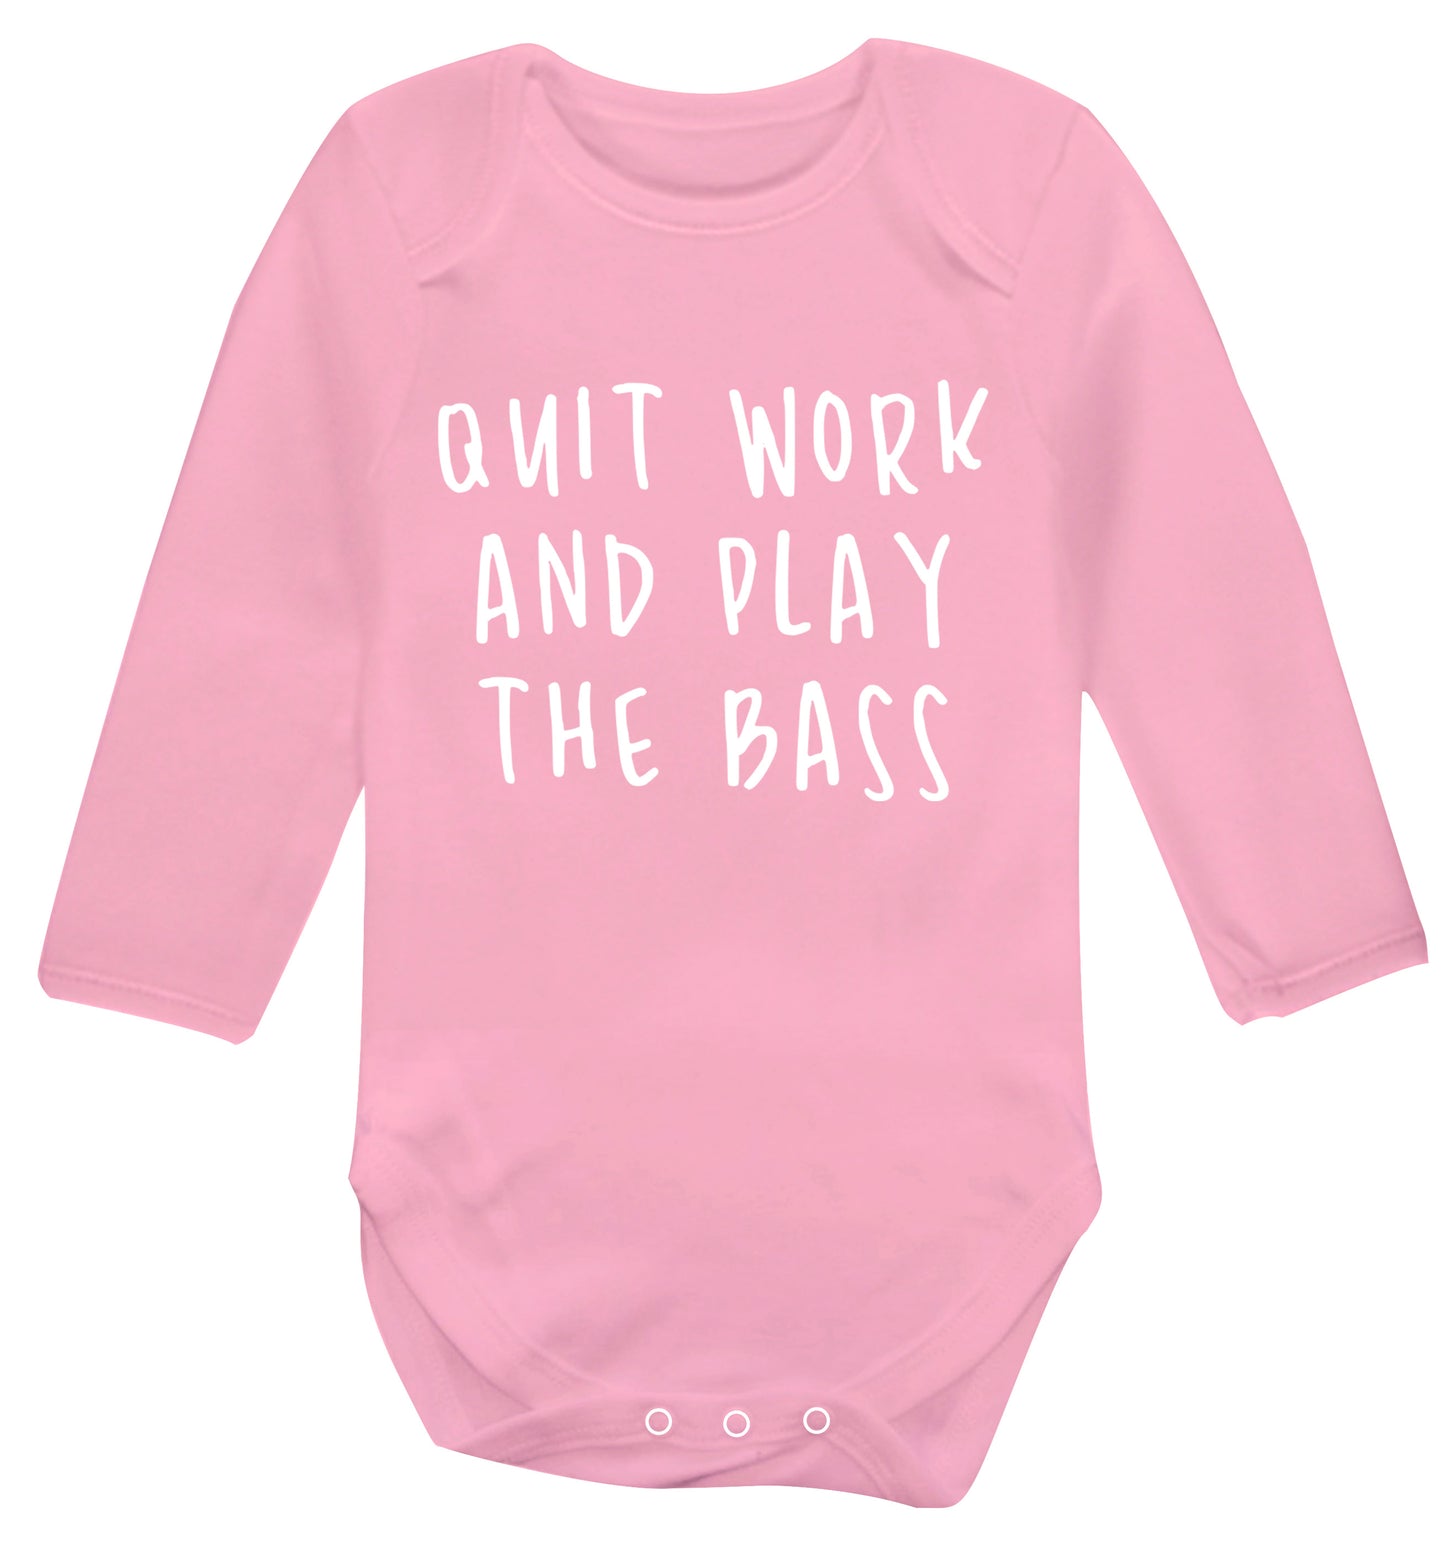 Quit work and play the bass Baby Vest long sleeved pale pink 6-12 months